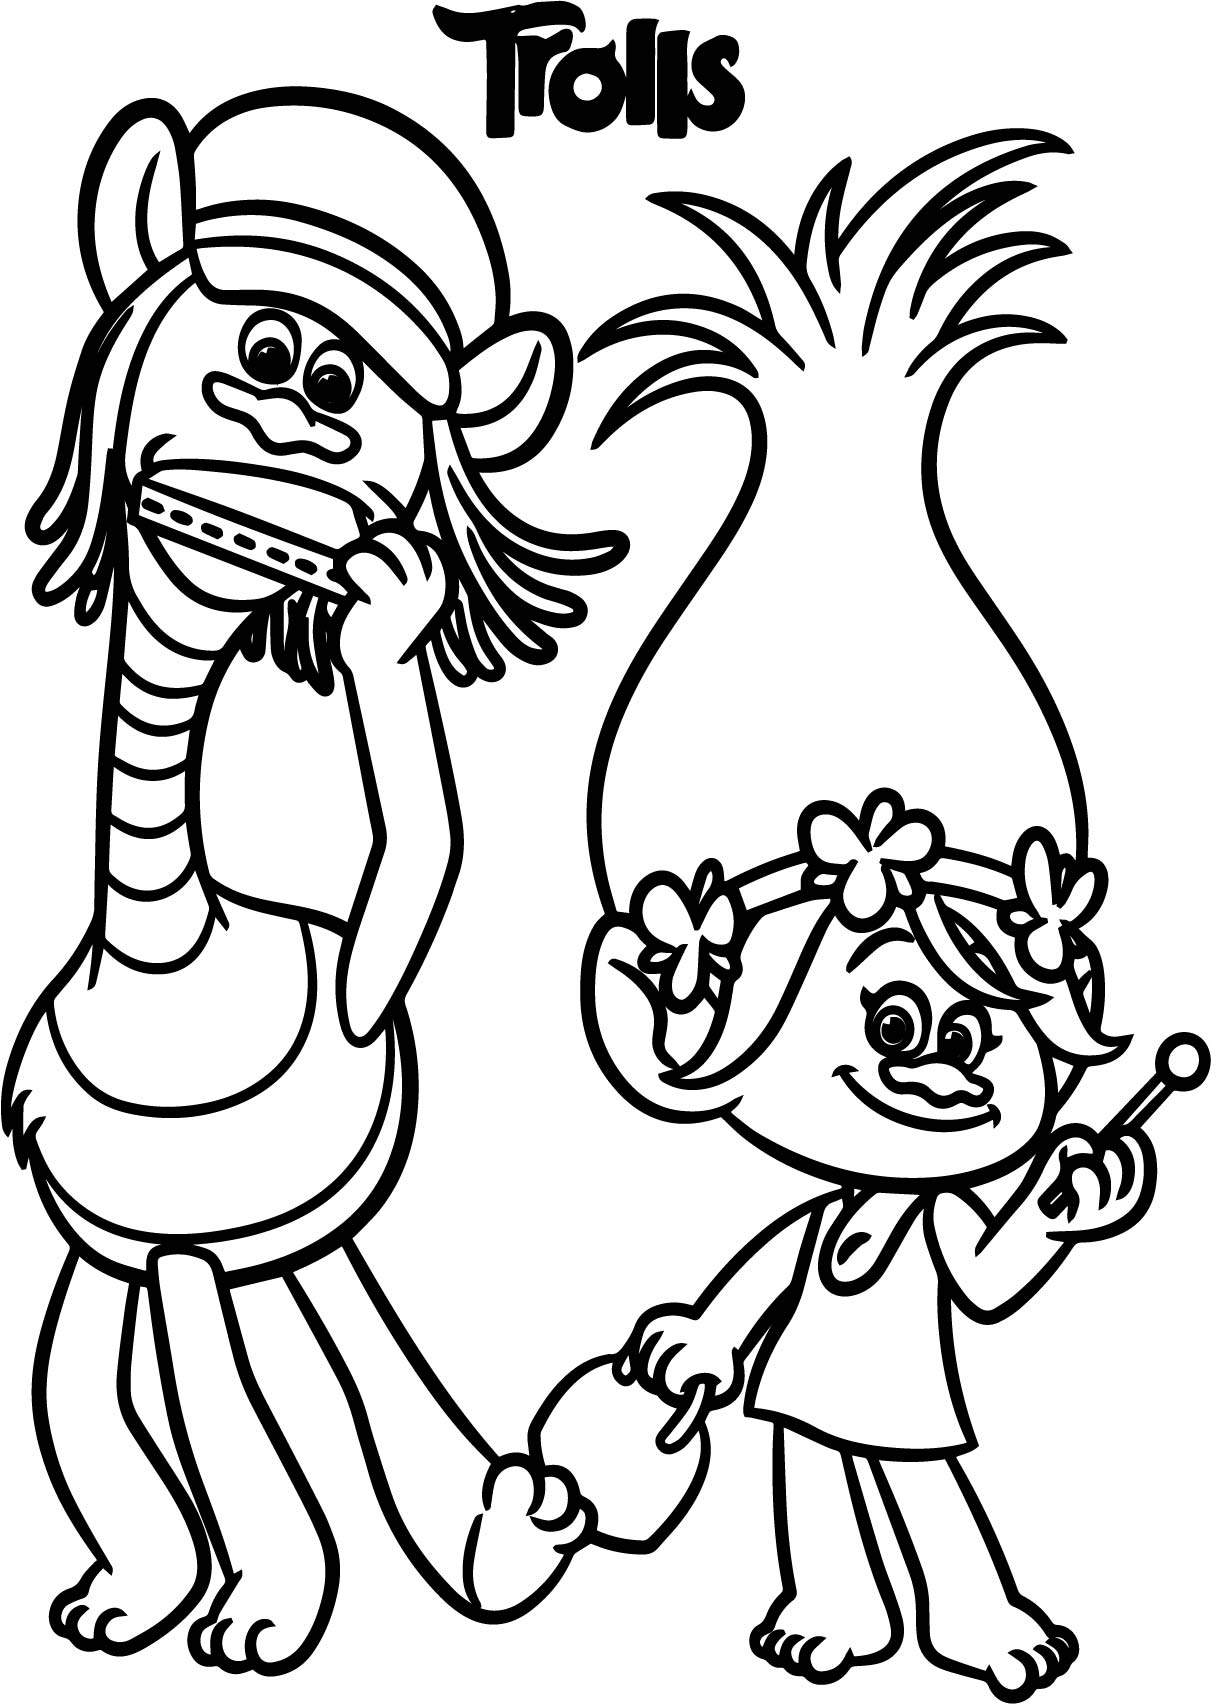 Colouring sheets trolls free image